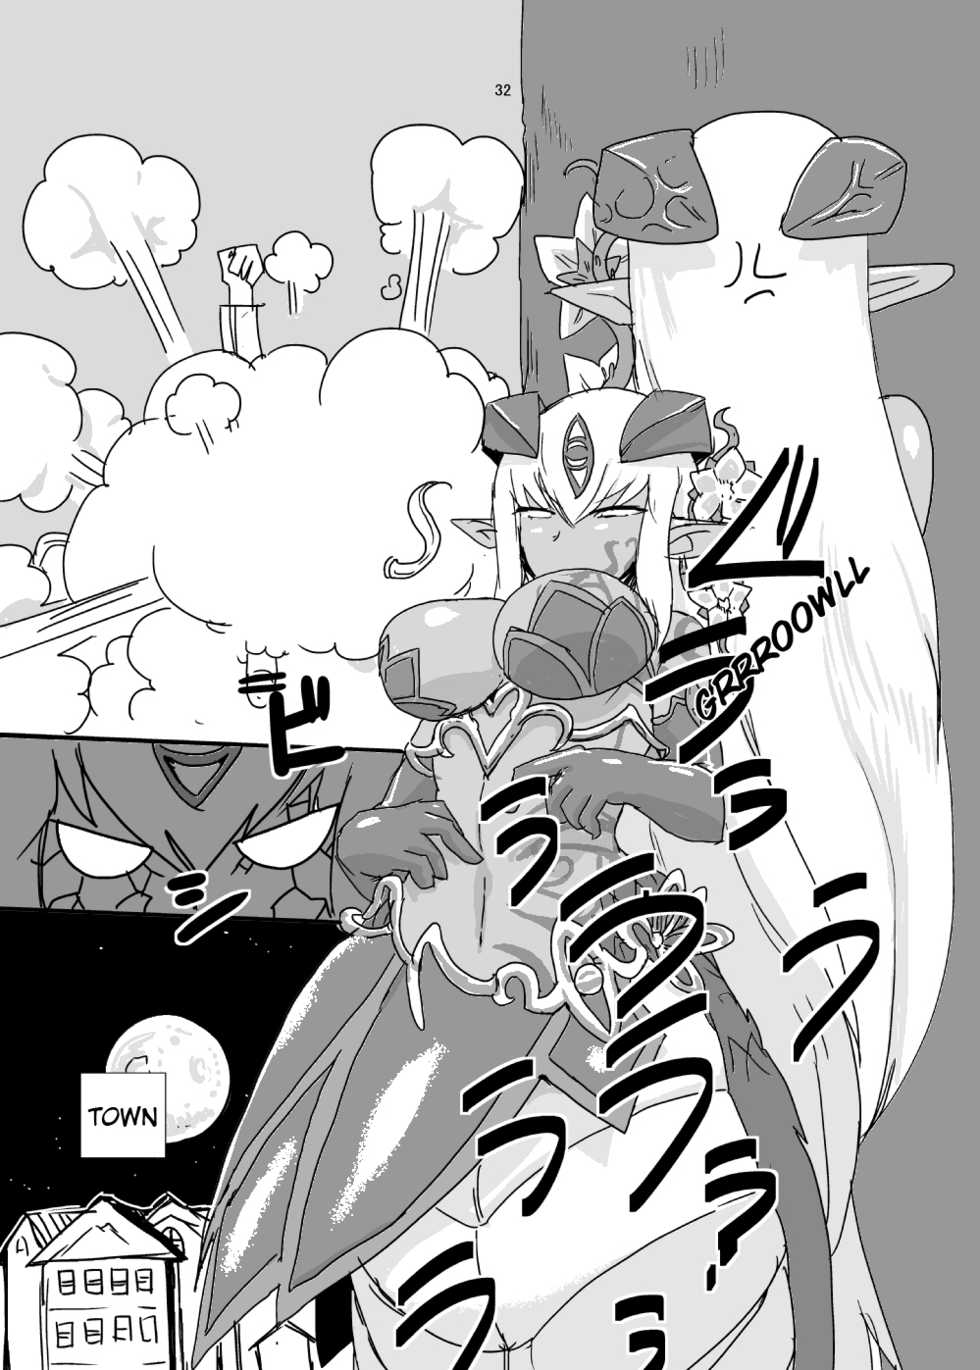 [Setouchi Pharm (Setouchi)] Mon Musu Quest! Beyond The End 2 (Monster Girl Quest!) [English] {OtherSideofSky} [Digital] - Page 31